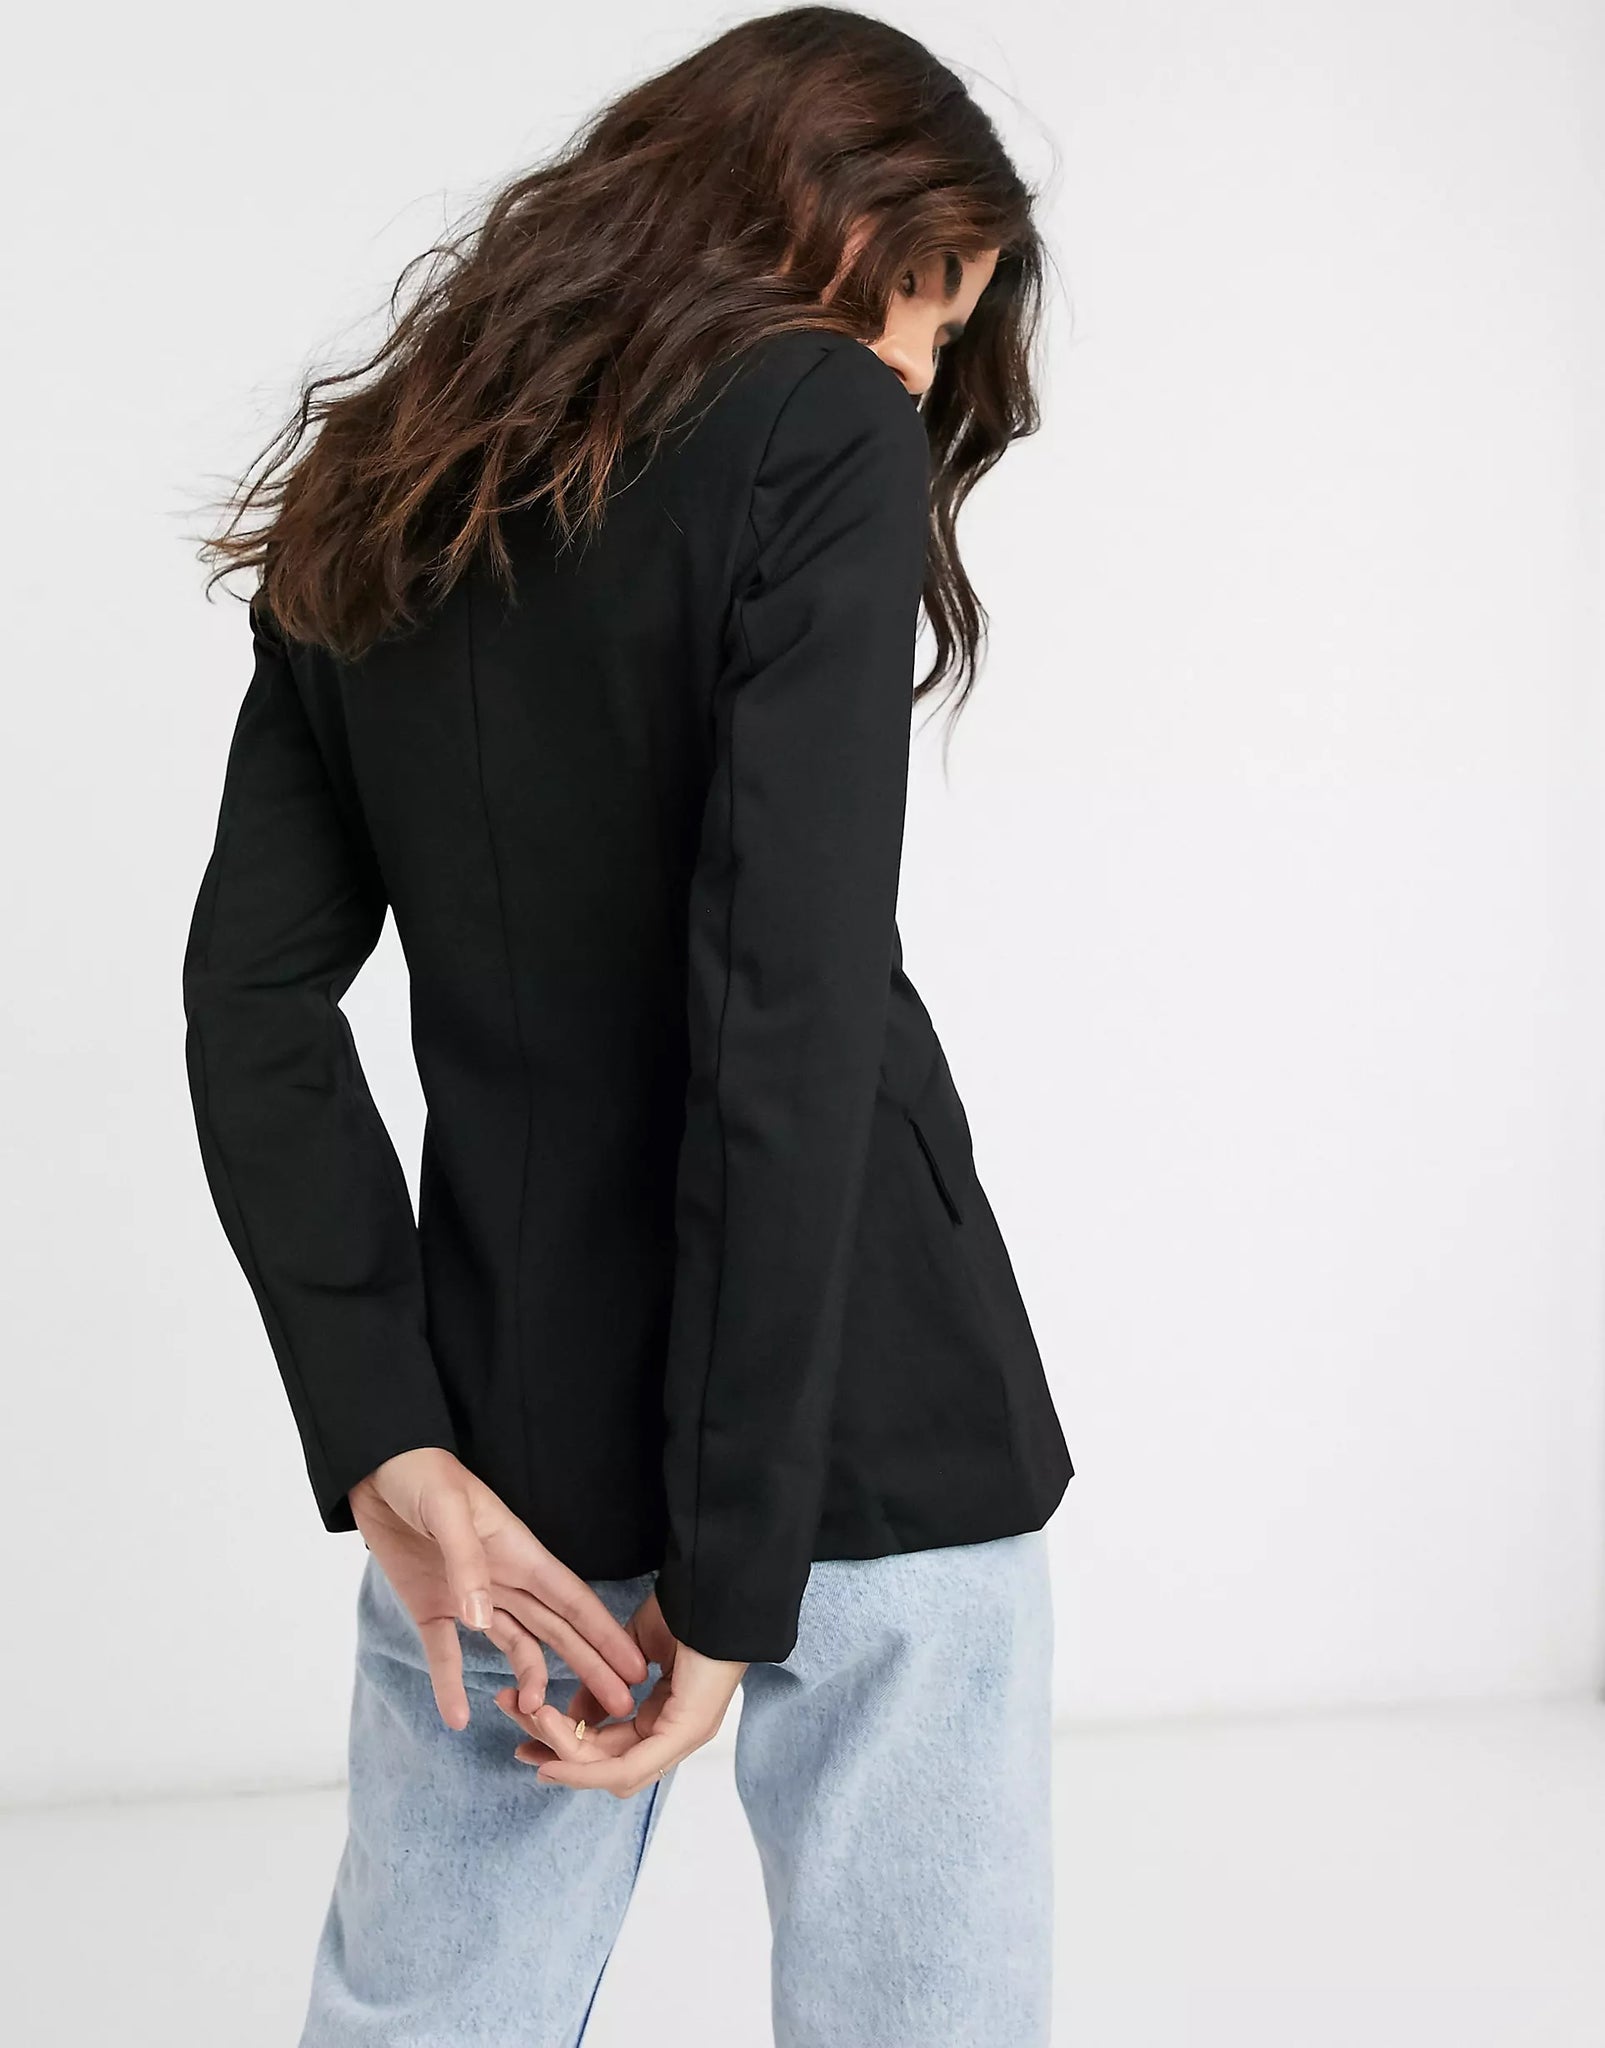 Black Lined Duble Breasted Lined Blazer